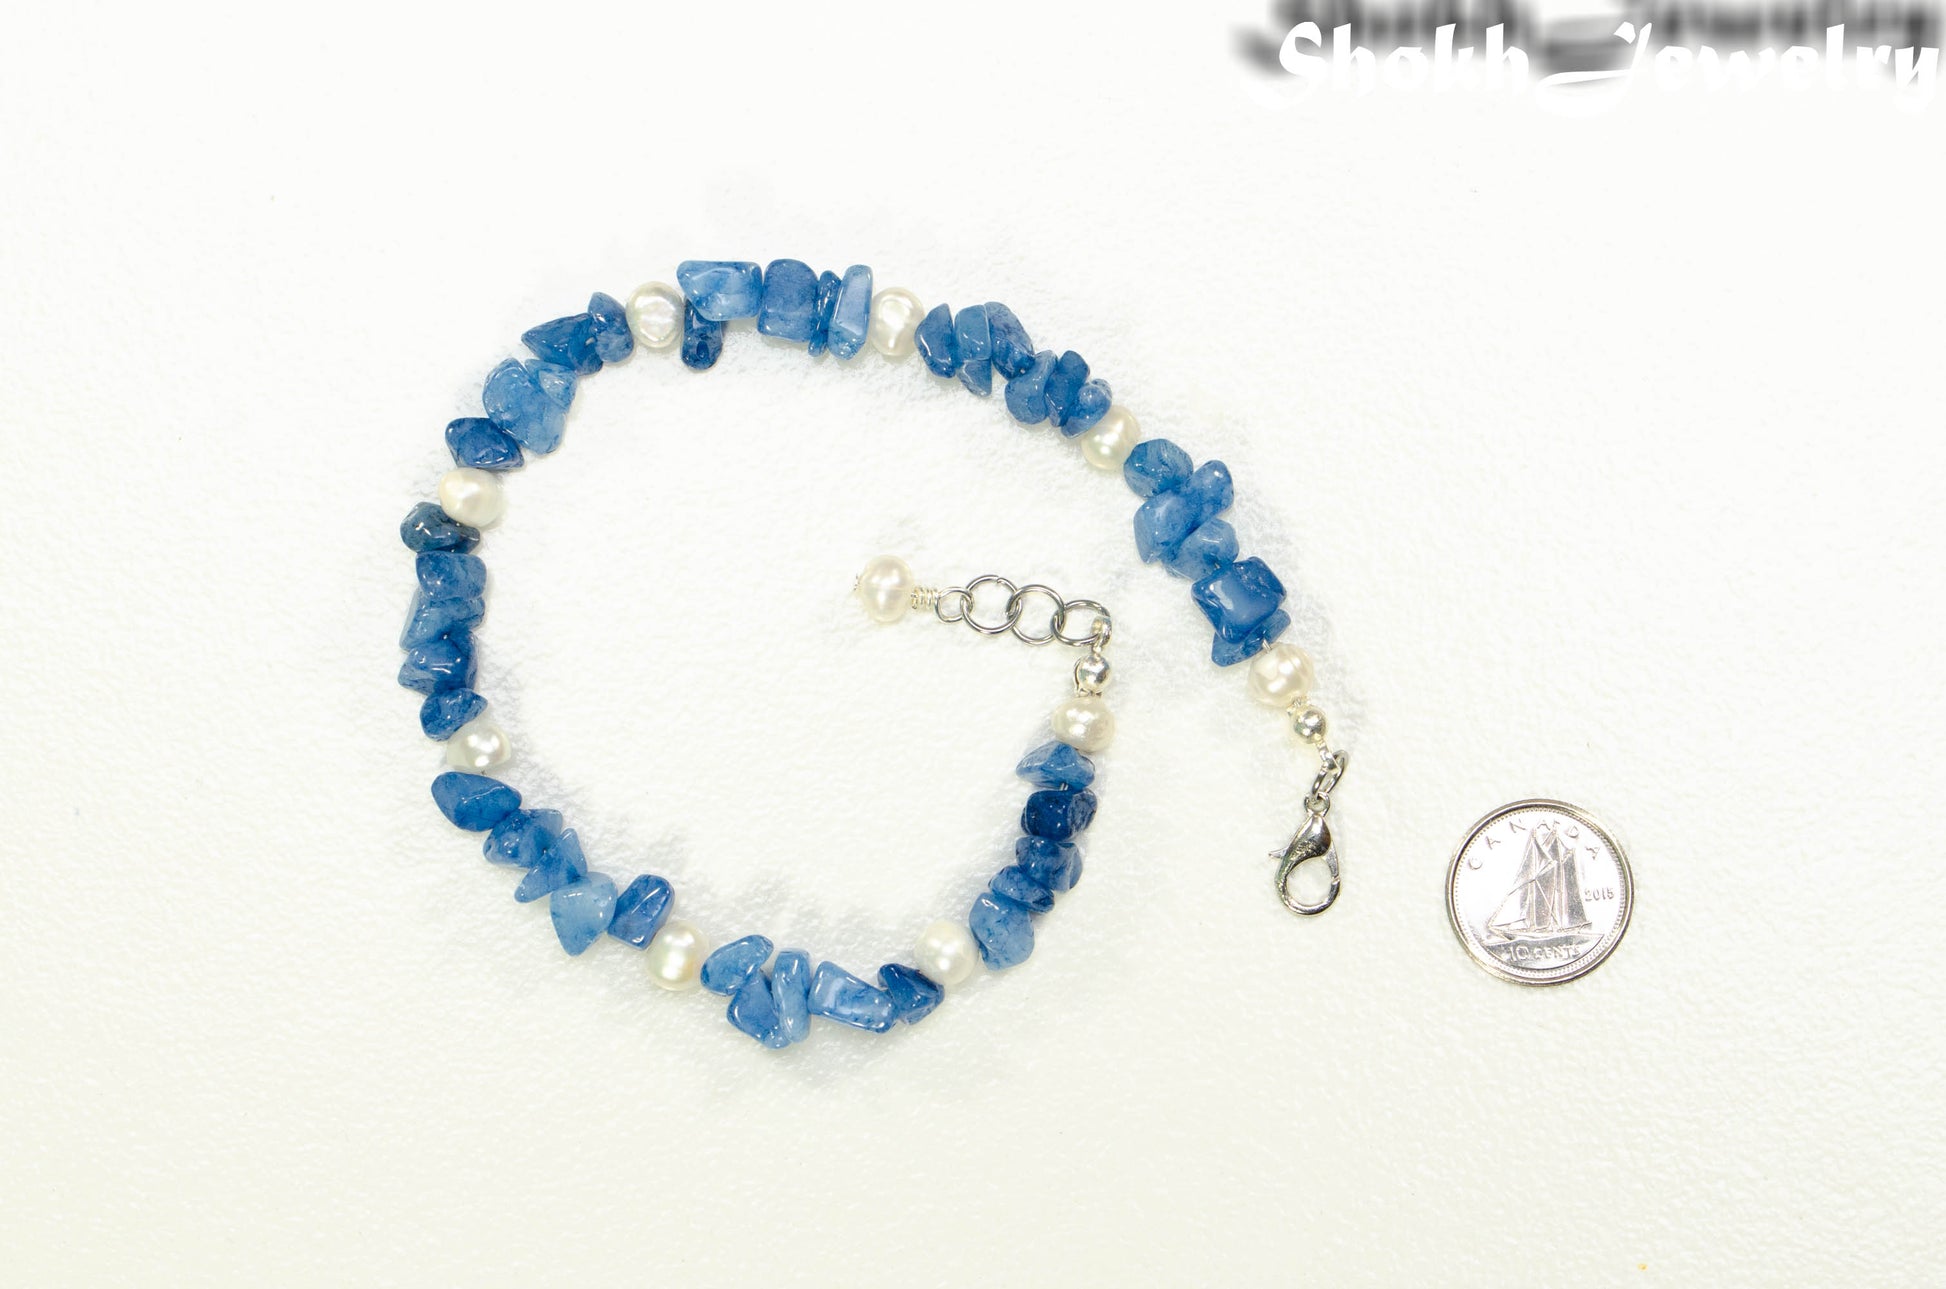 Natural Blue Quartzite Crystal Chip and Pearls Bracelet beside a dime.